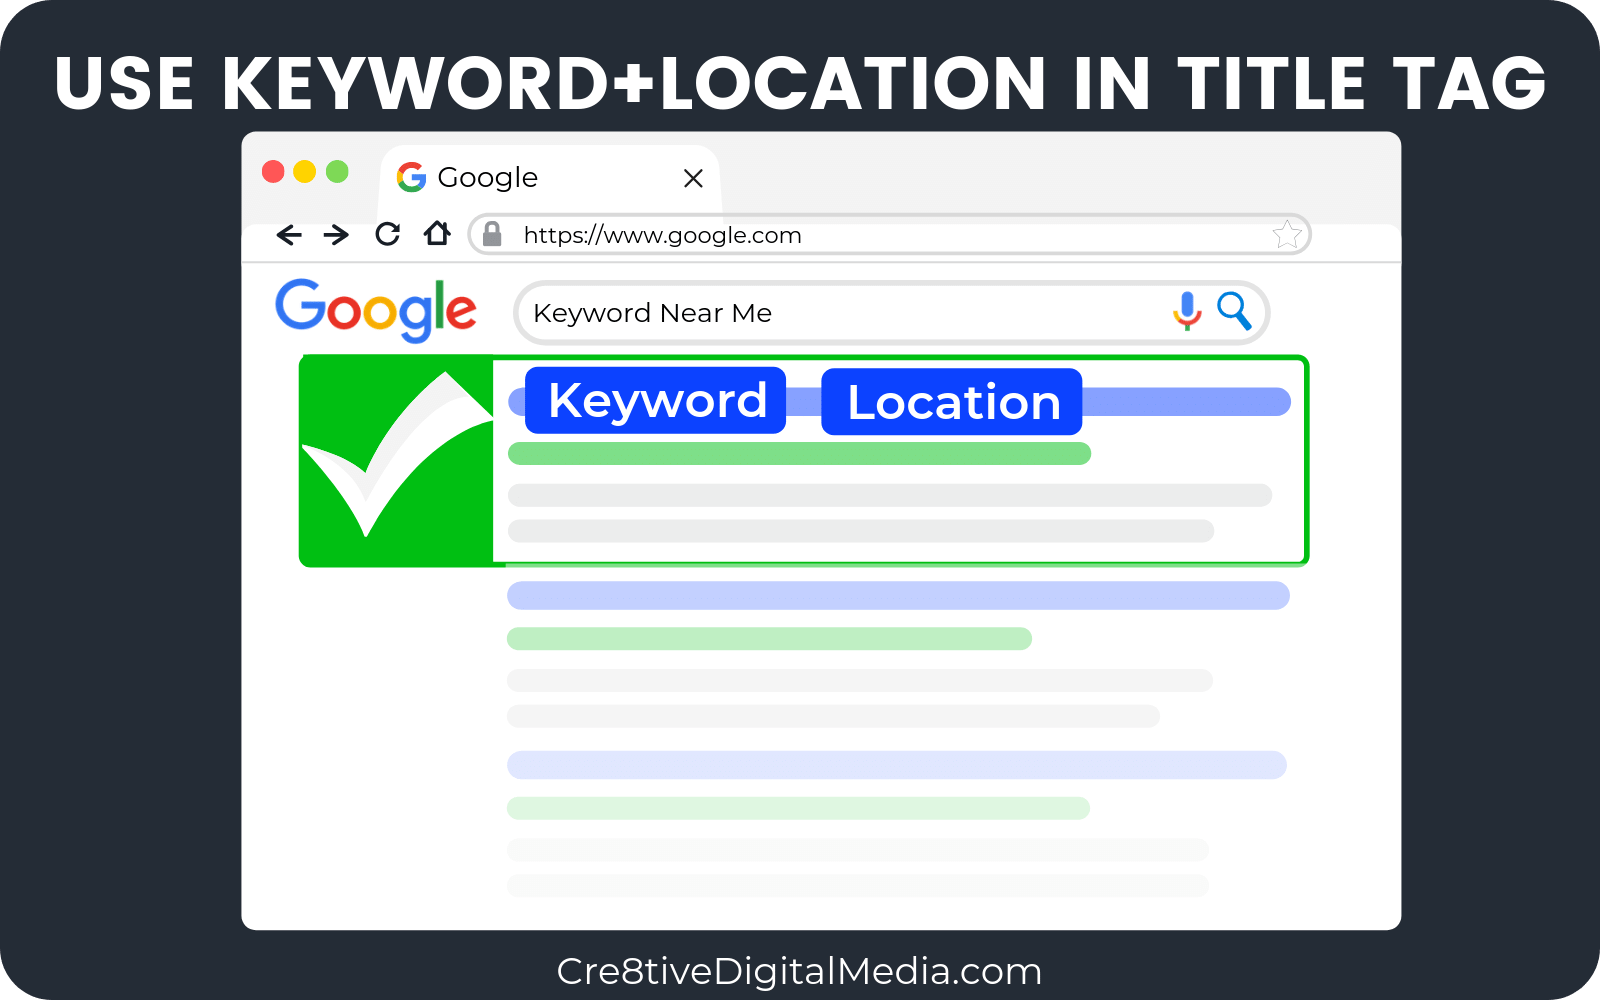 Primary keyword and location in title tag